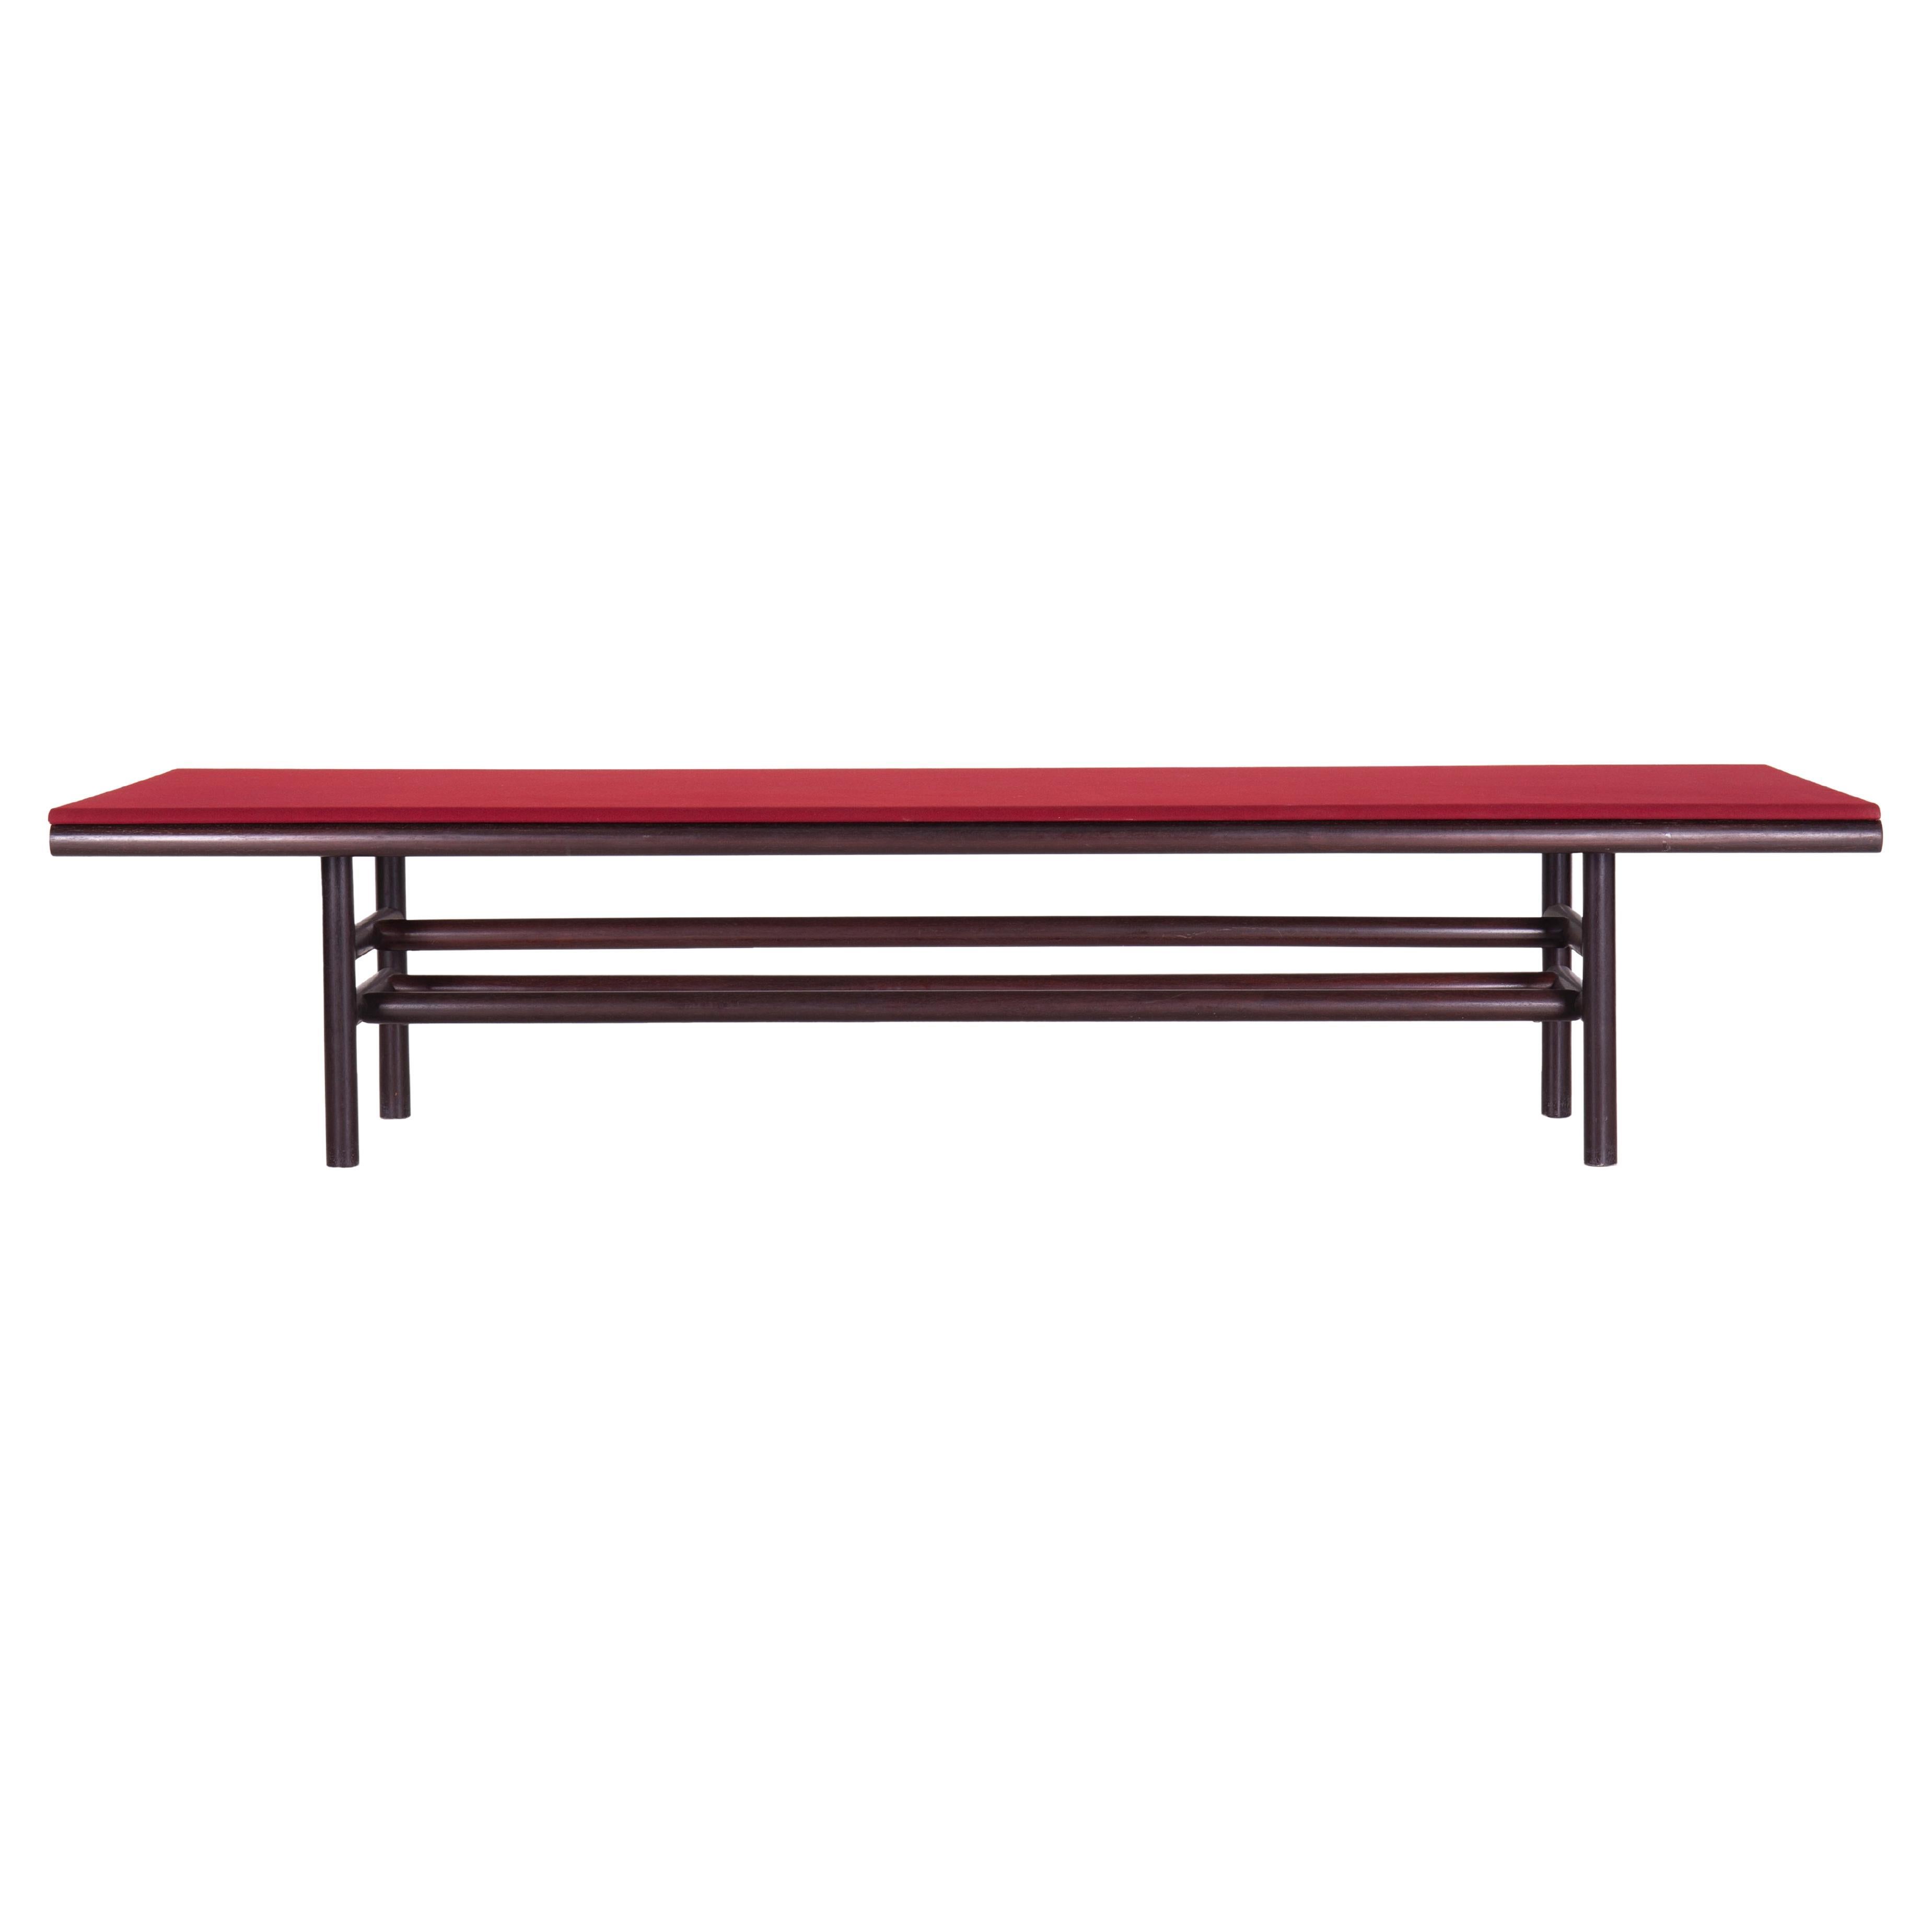 Gritti Table by Carlo Scarpa produced by Simon in 1976